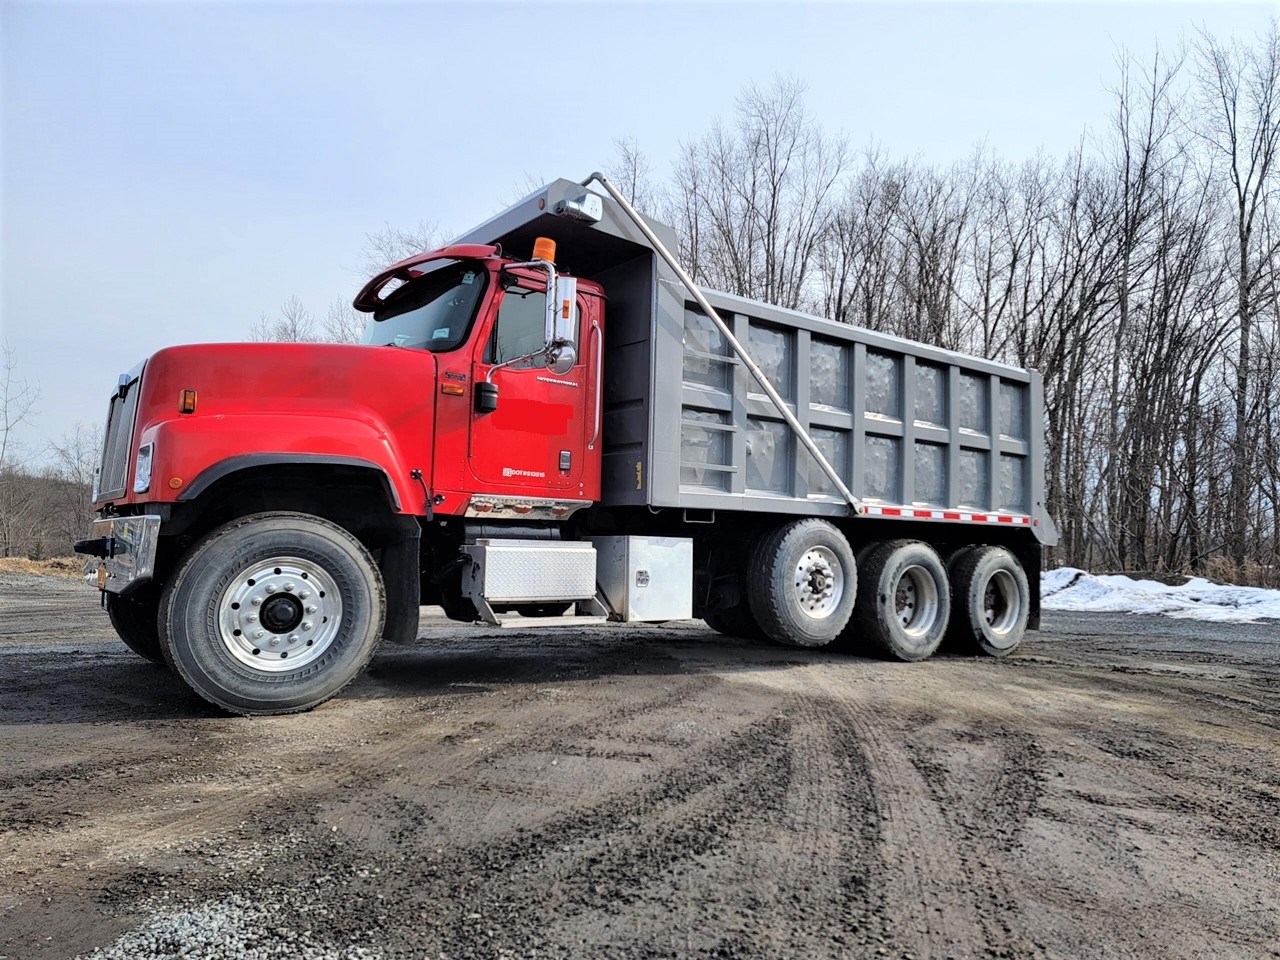 International Tri Axle Dump Truck. 2006 Paystar with 235368 miles. ISX Cummins 500 horsepower diesel engine with a three stage engine brake. 18 speed Eaton Fuller transmission with double locking rears. 20k lb. fronts, 20k lb. steerable lift axle and 46k lb. rears. All new in rear Chalmers suspension package for supper comfortable control and ride. 242 inch wheelbase. 17.5 foot long by 5 foot high steel dump box sandblasted and repainted outside. Interior Eagle package design with power windows, power locks, cruise control, heated mirrors, heat/AC, AM/FM CD player and air ride drivers seat.